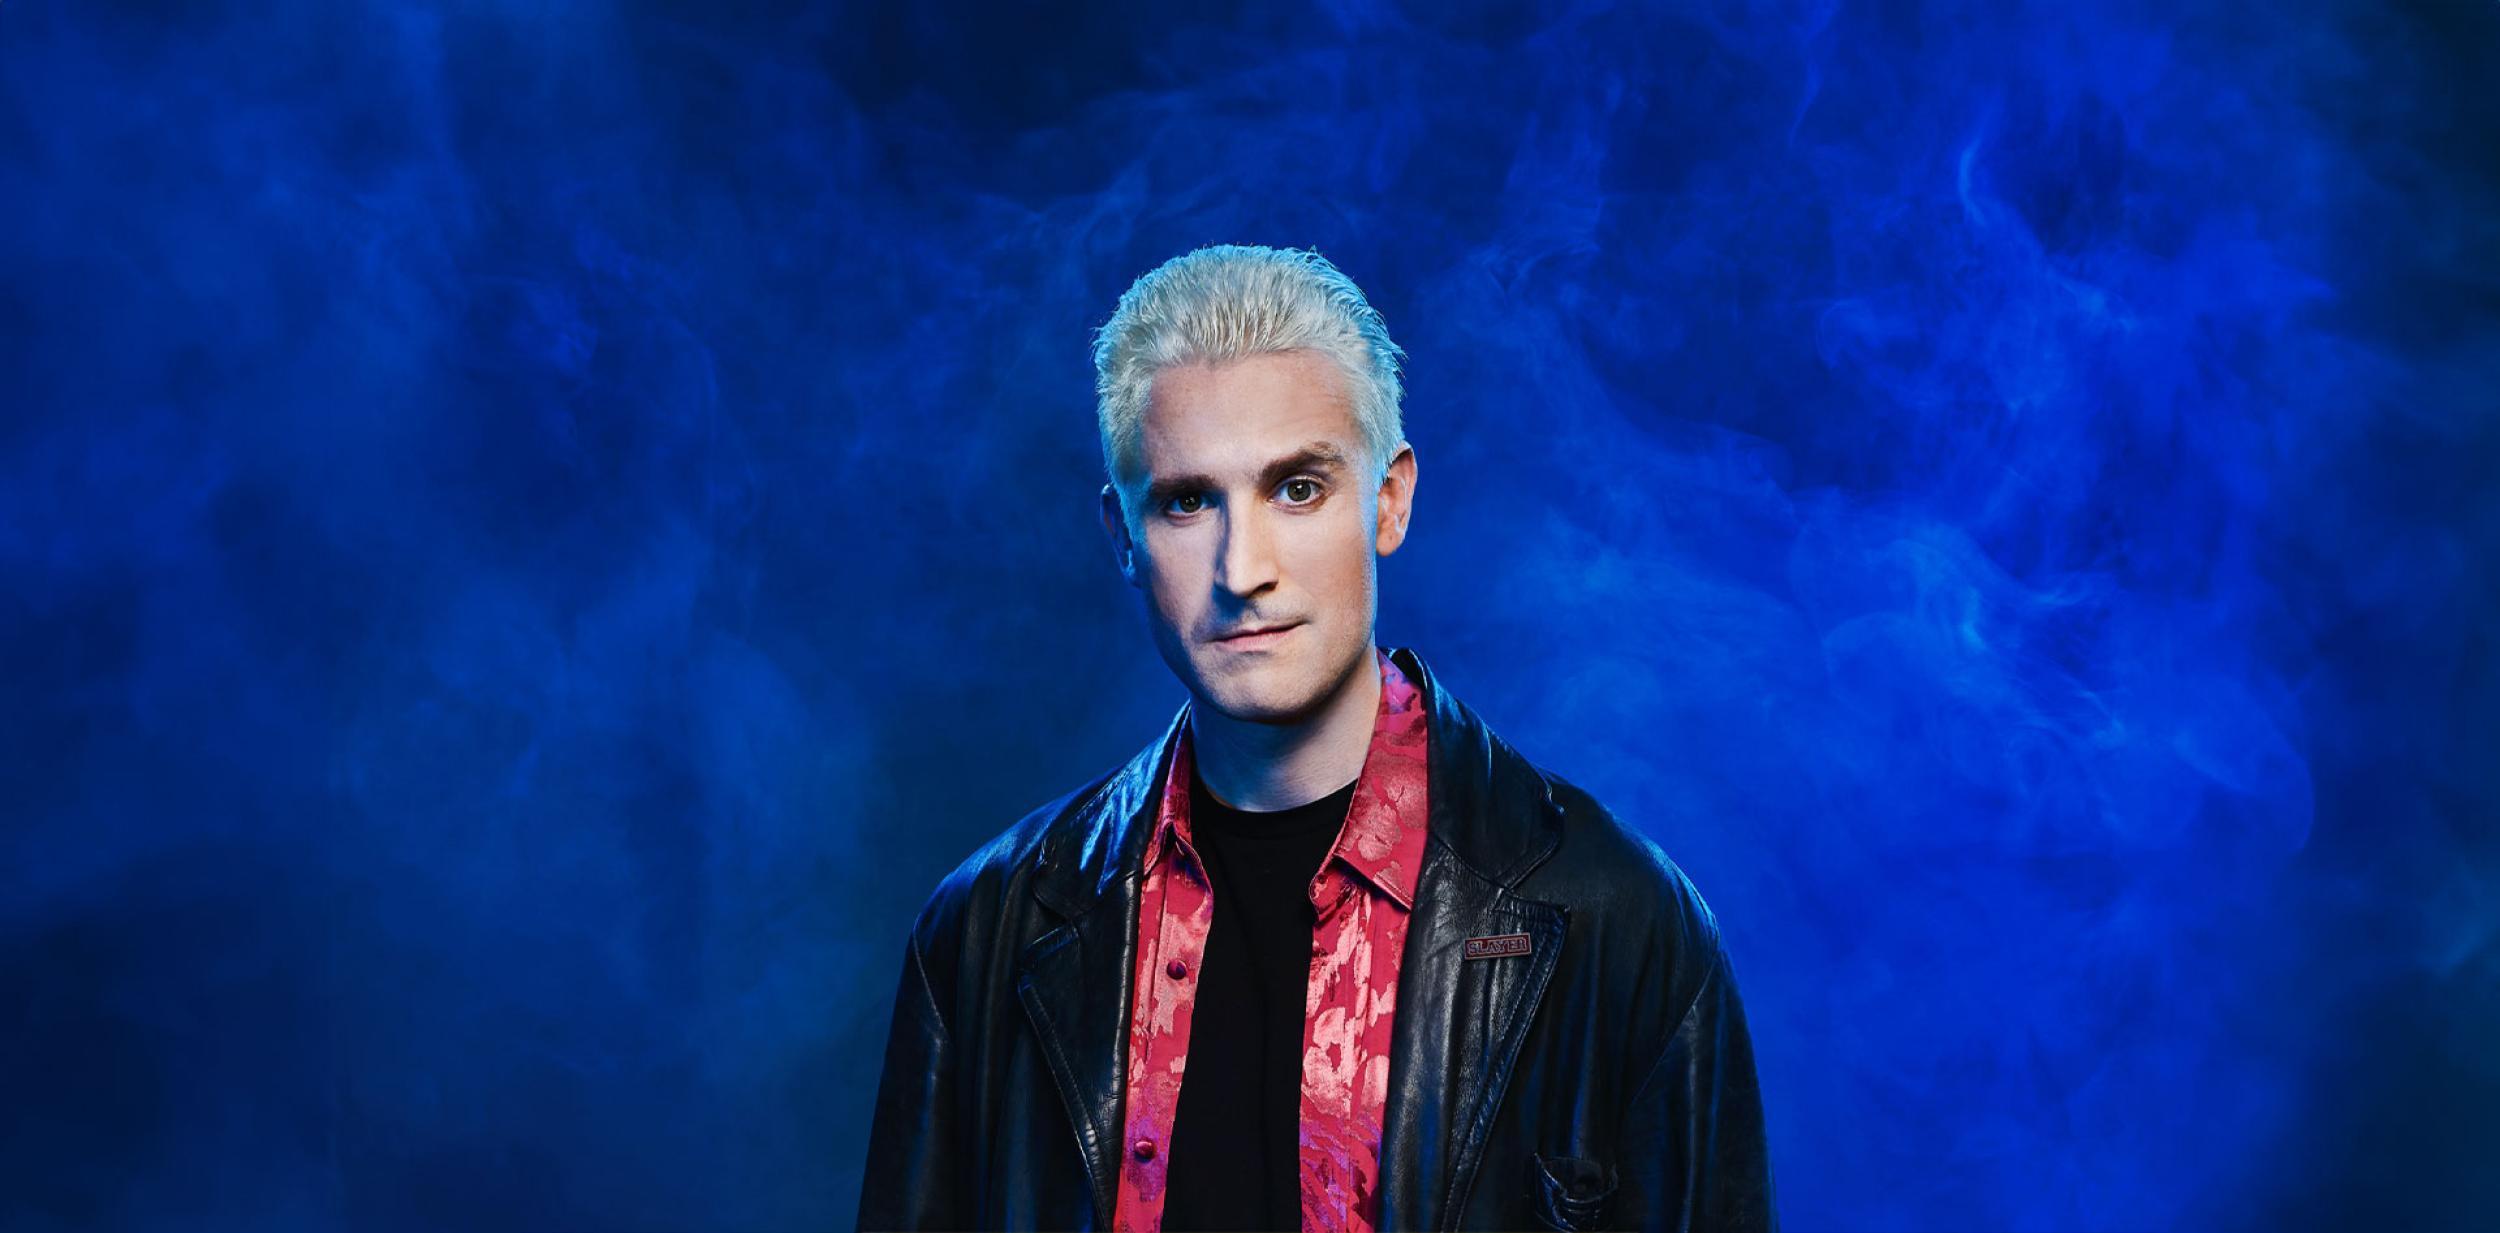 A person dressed as Spike from Buffy the Vampire Slayer